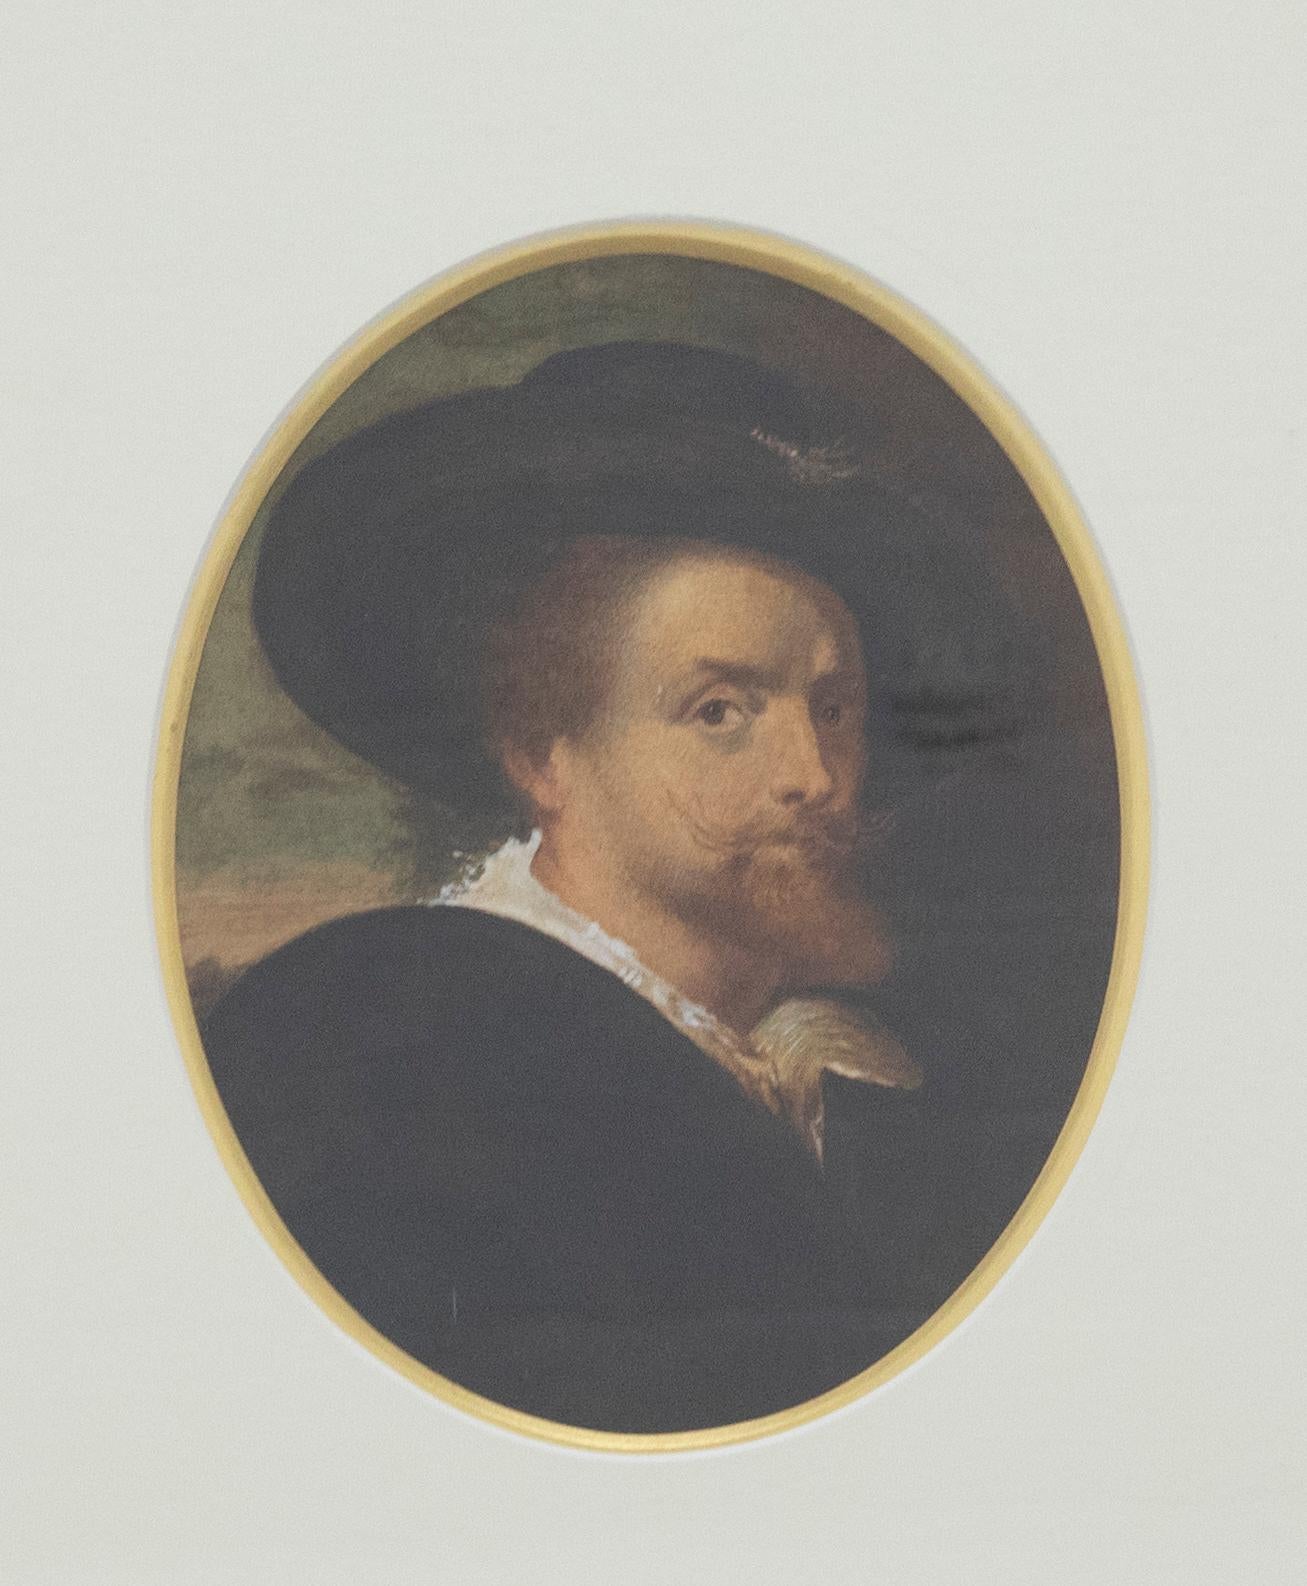 A fine watercolour copy of the famous original oil self portrait by Peter Paul Rubens, painted in 1623. The painting is unsigned and presented in a fine 19th Century gilt frame with acanthus leaf ornamentation at the corner, finished with a card